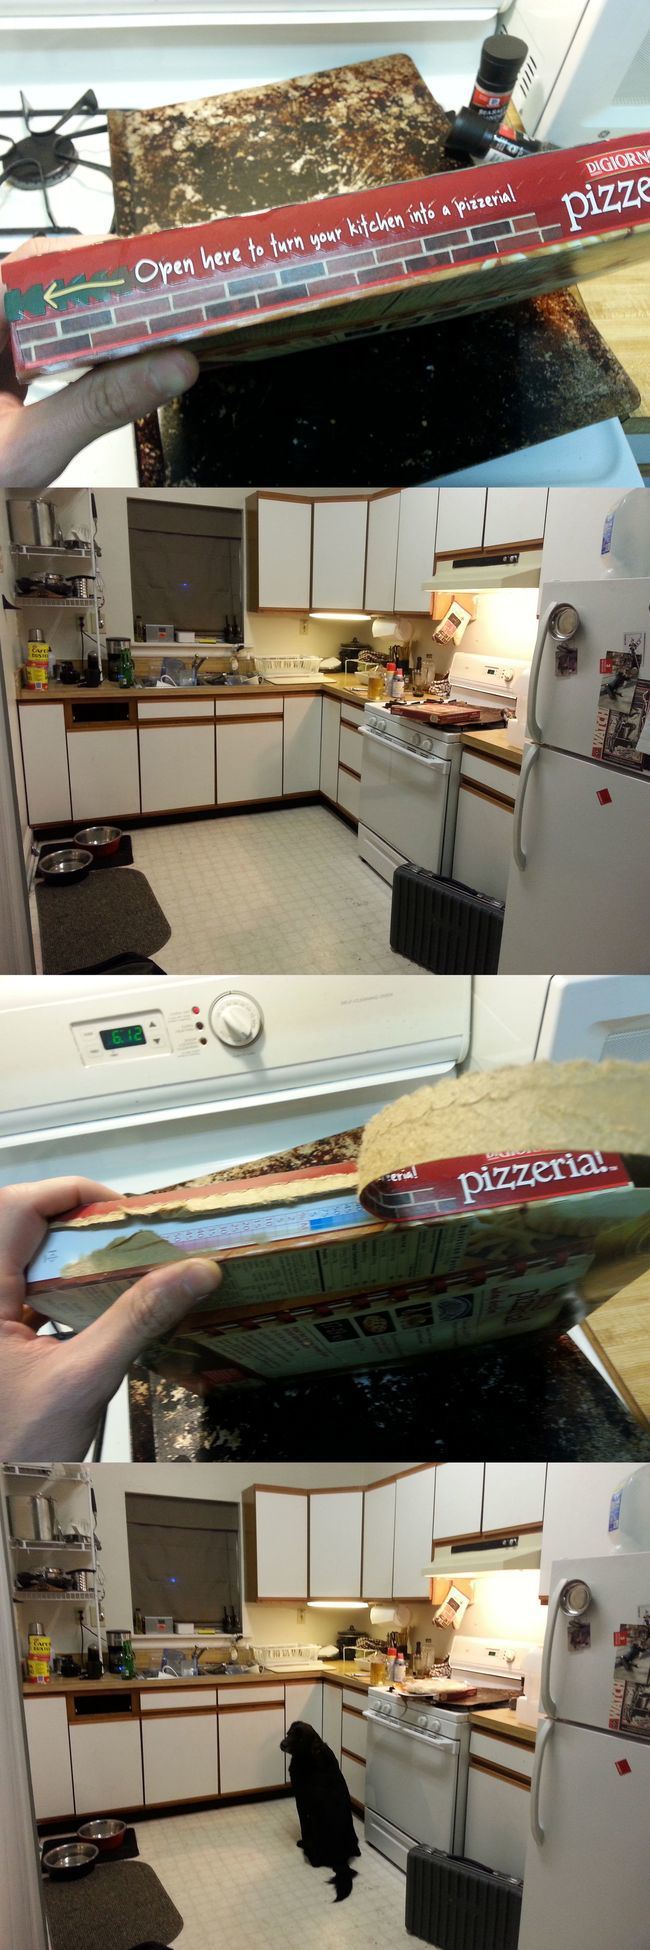 car - Digiorn I pizze Open here to turn your kitchen into a pizzerial I pizzeria..